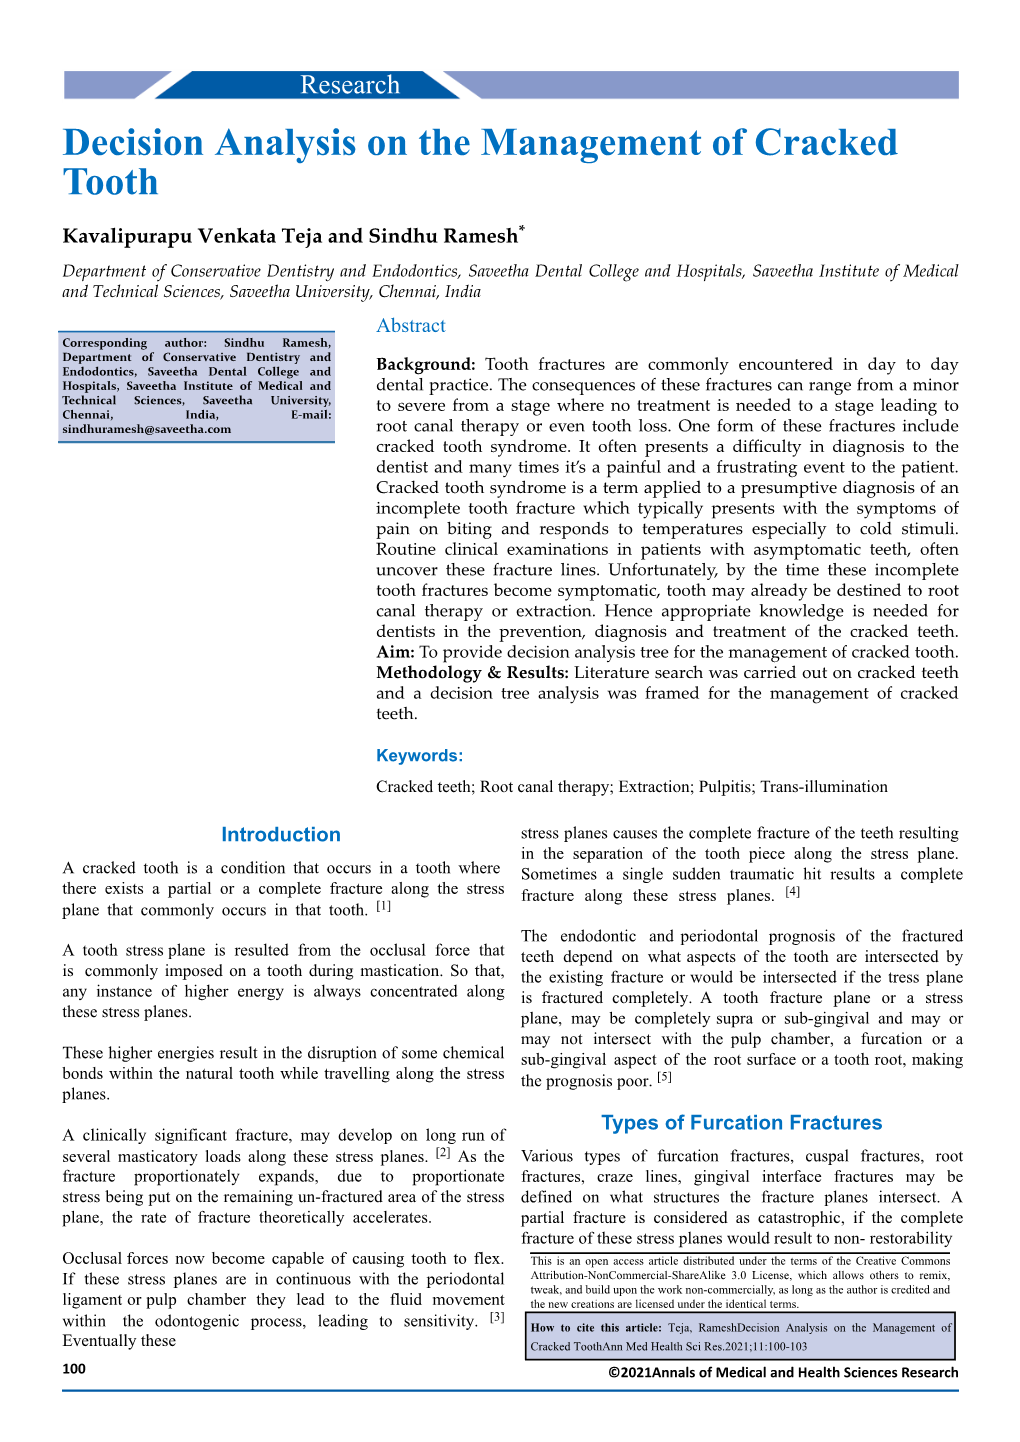 Decision Analysis on the Management of Cracked Tooth